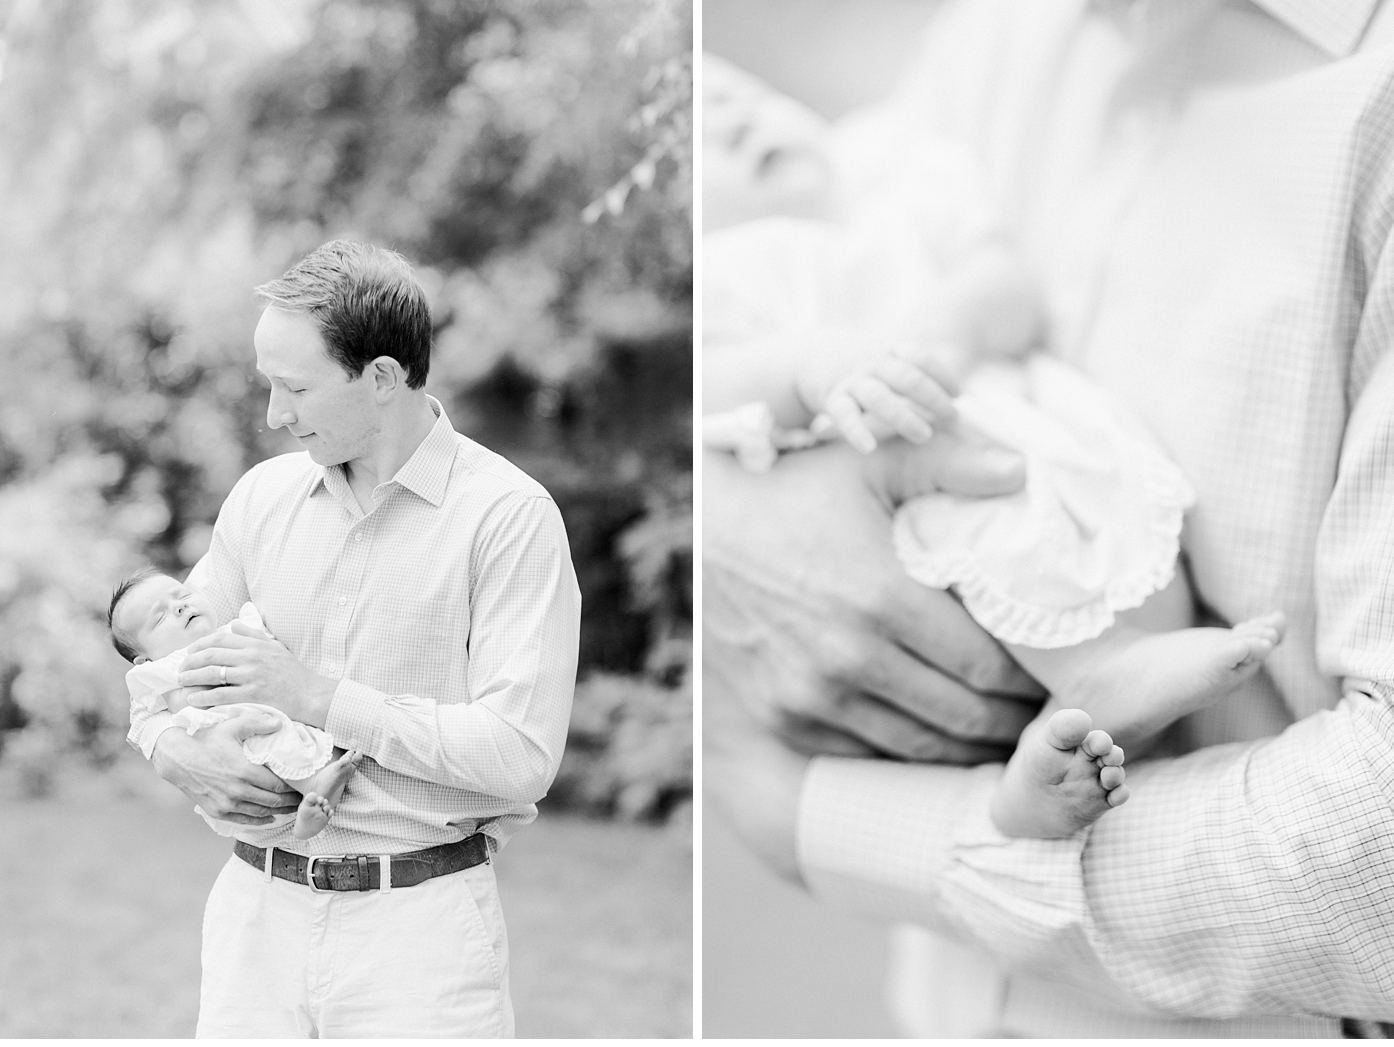 Light and Airy Lifestyle Newborn Session in Richmond Virginia by Alisandra Photography